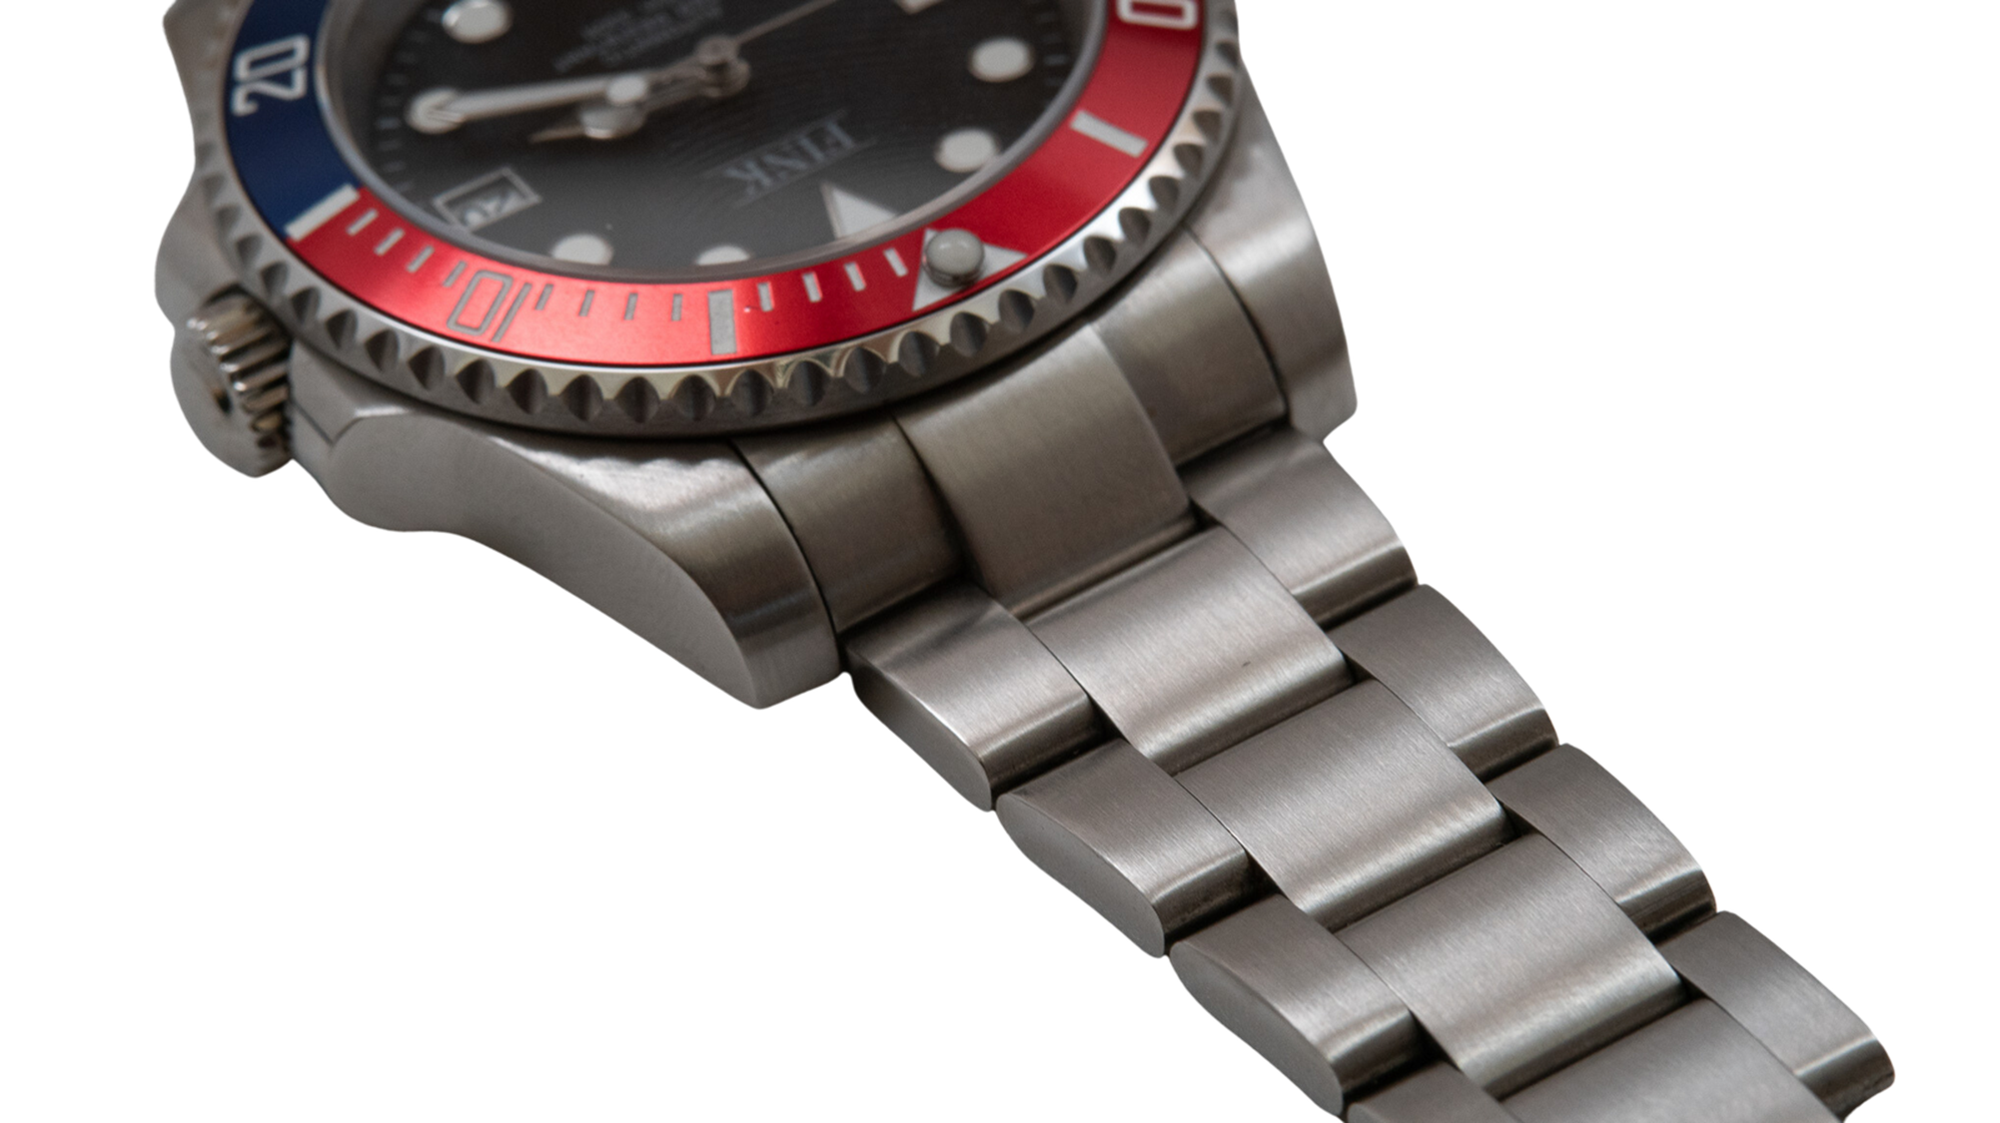 Stainless steel bracelet kit with tools (Diver One, GMT Voyager)